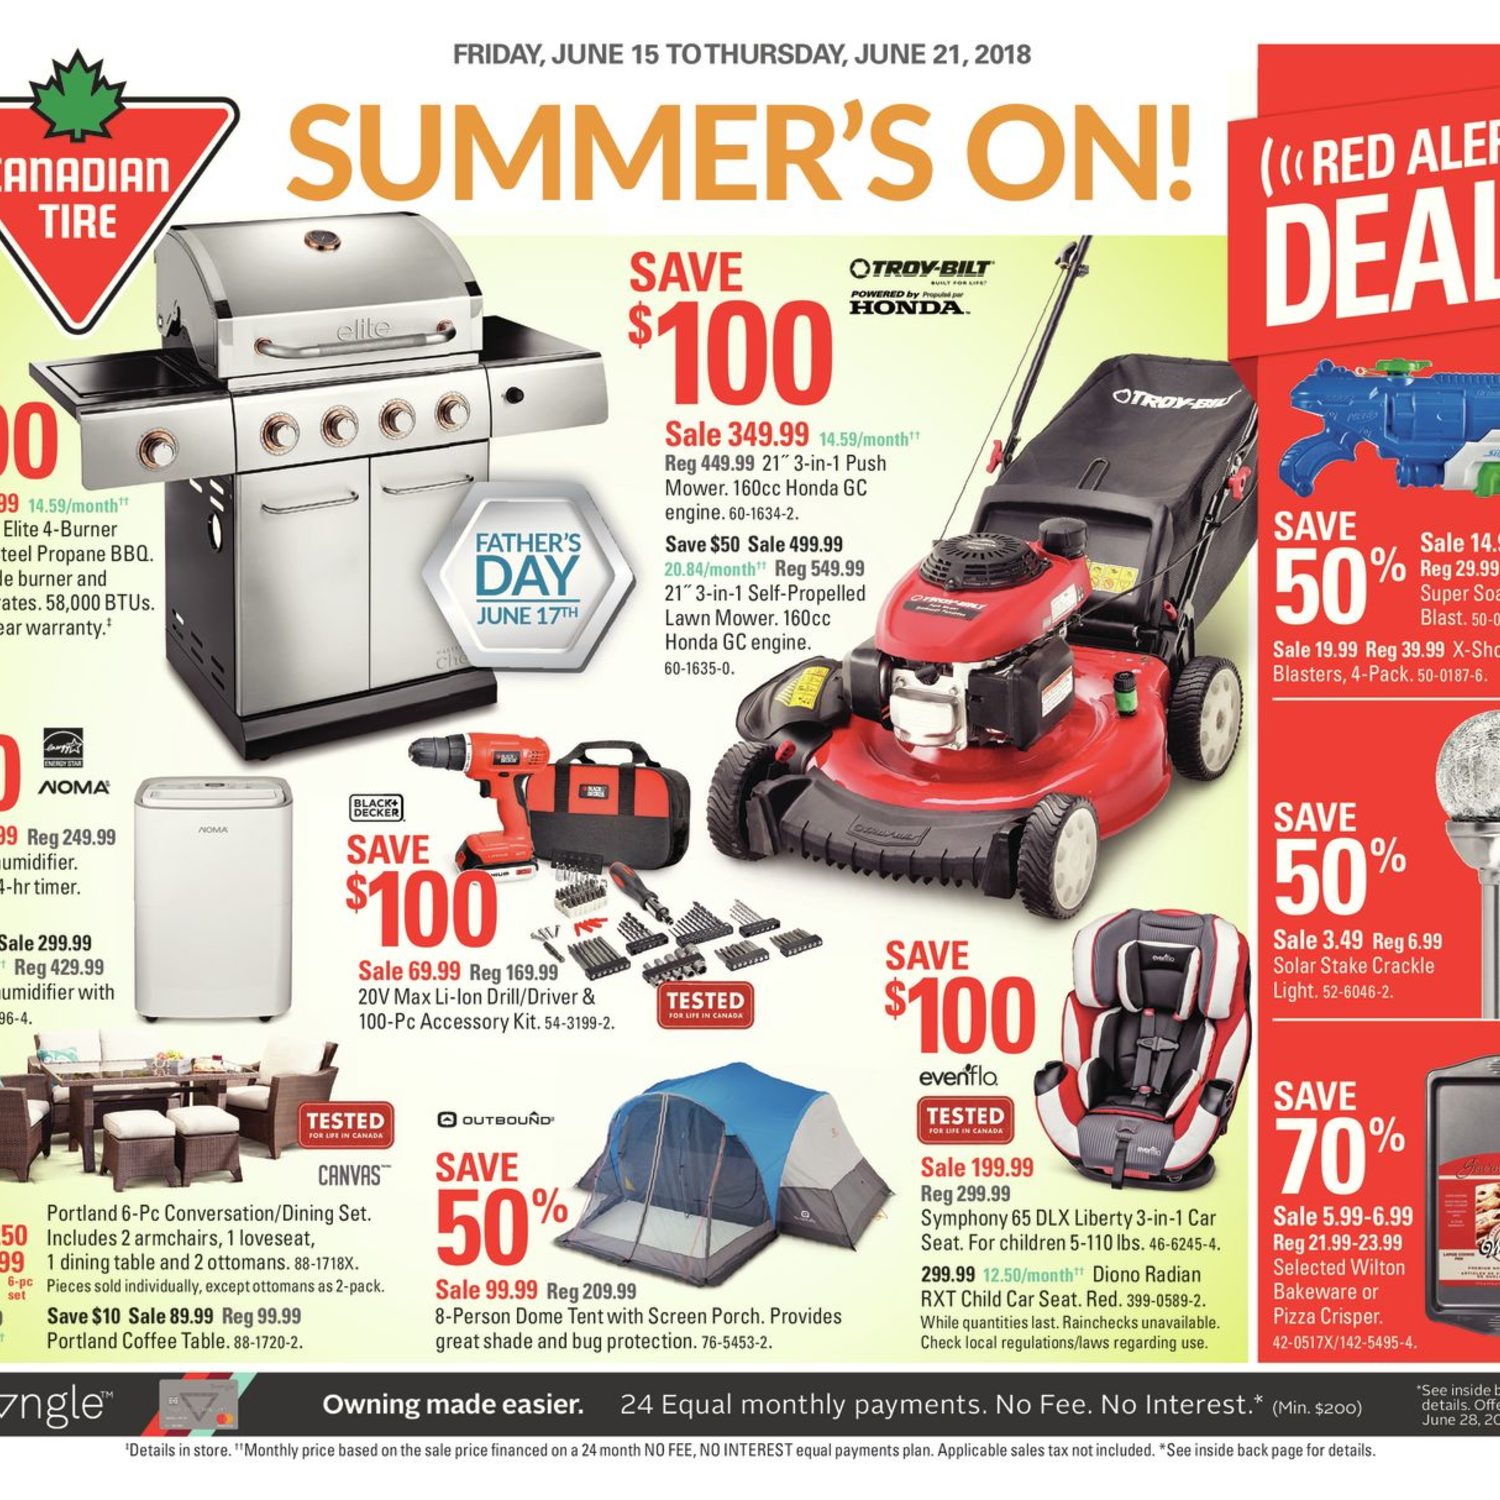 Canadian Tire Weekly Flyer Weekly Summer S On Jun 15 21